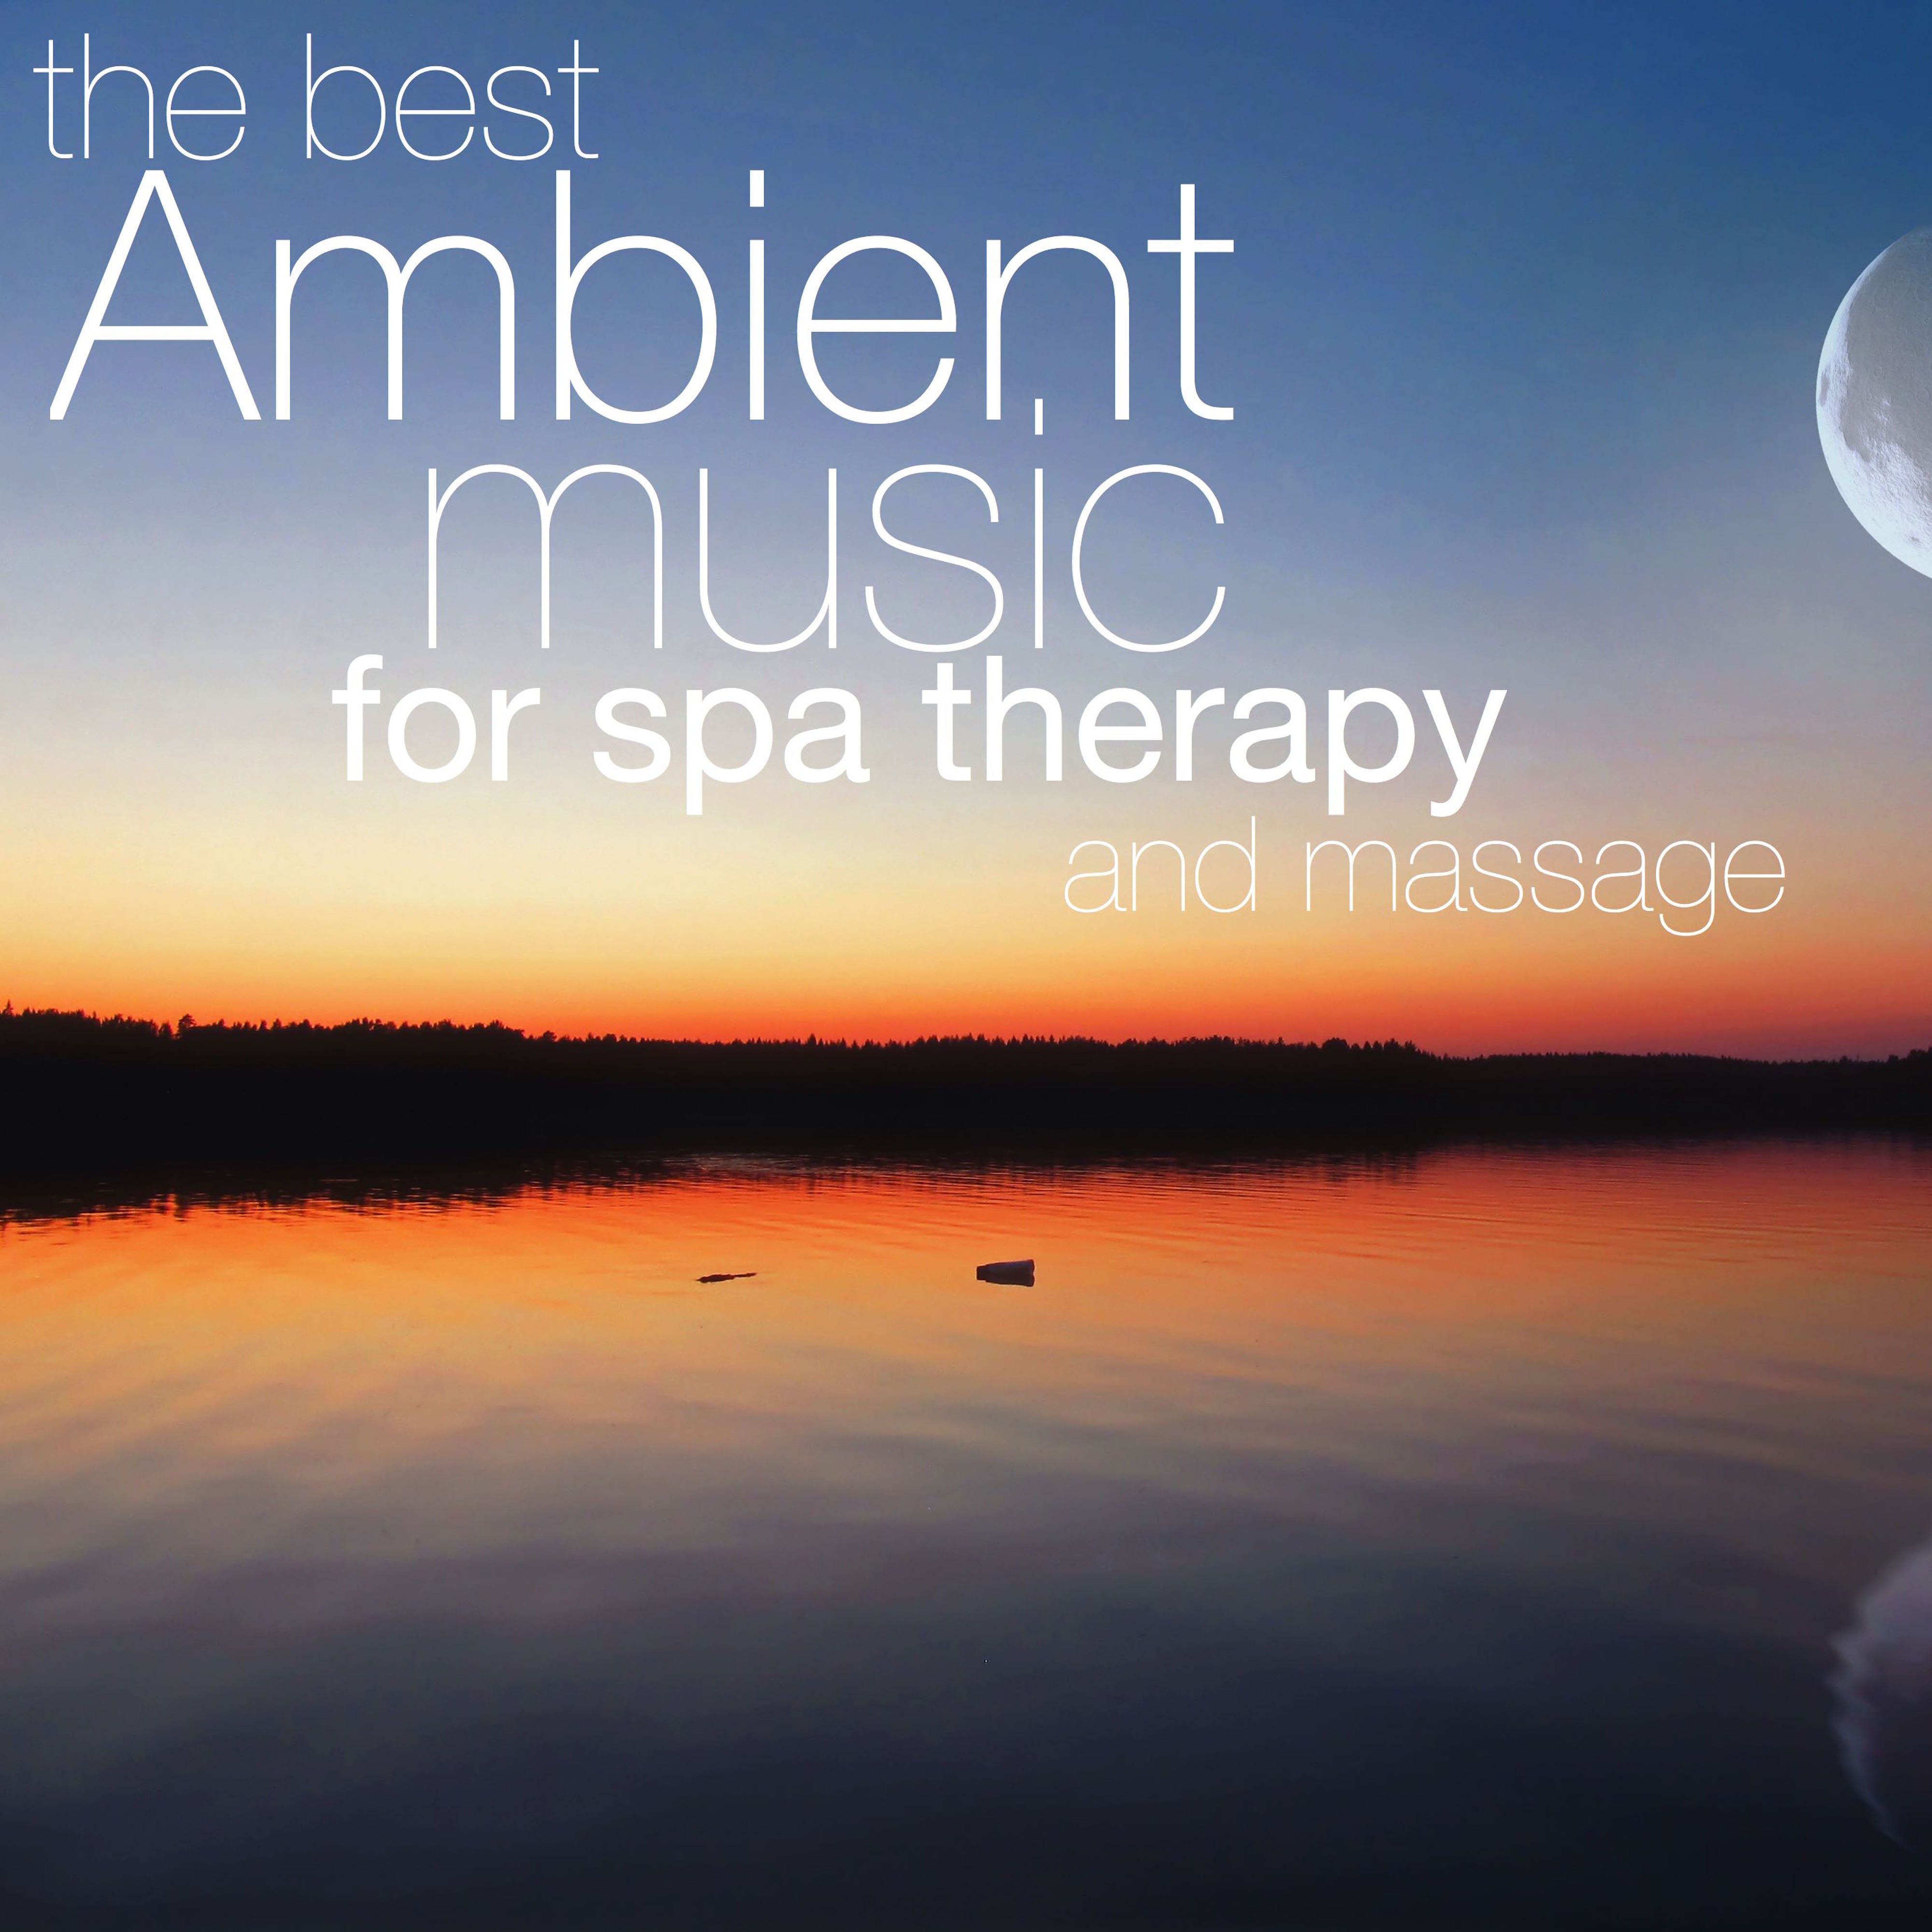 The Best Ambient Music for Spa Therapy and Massage